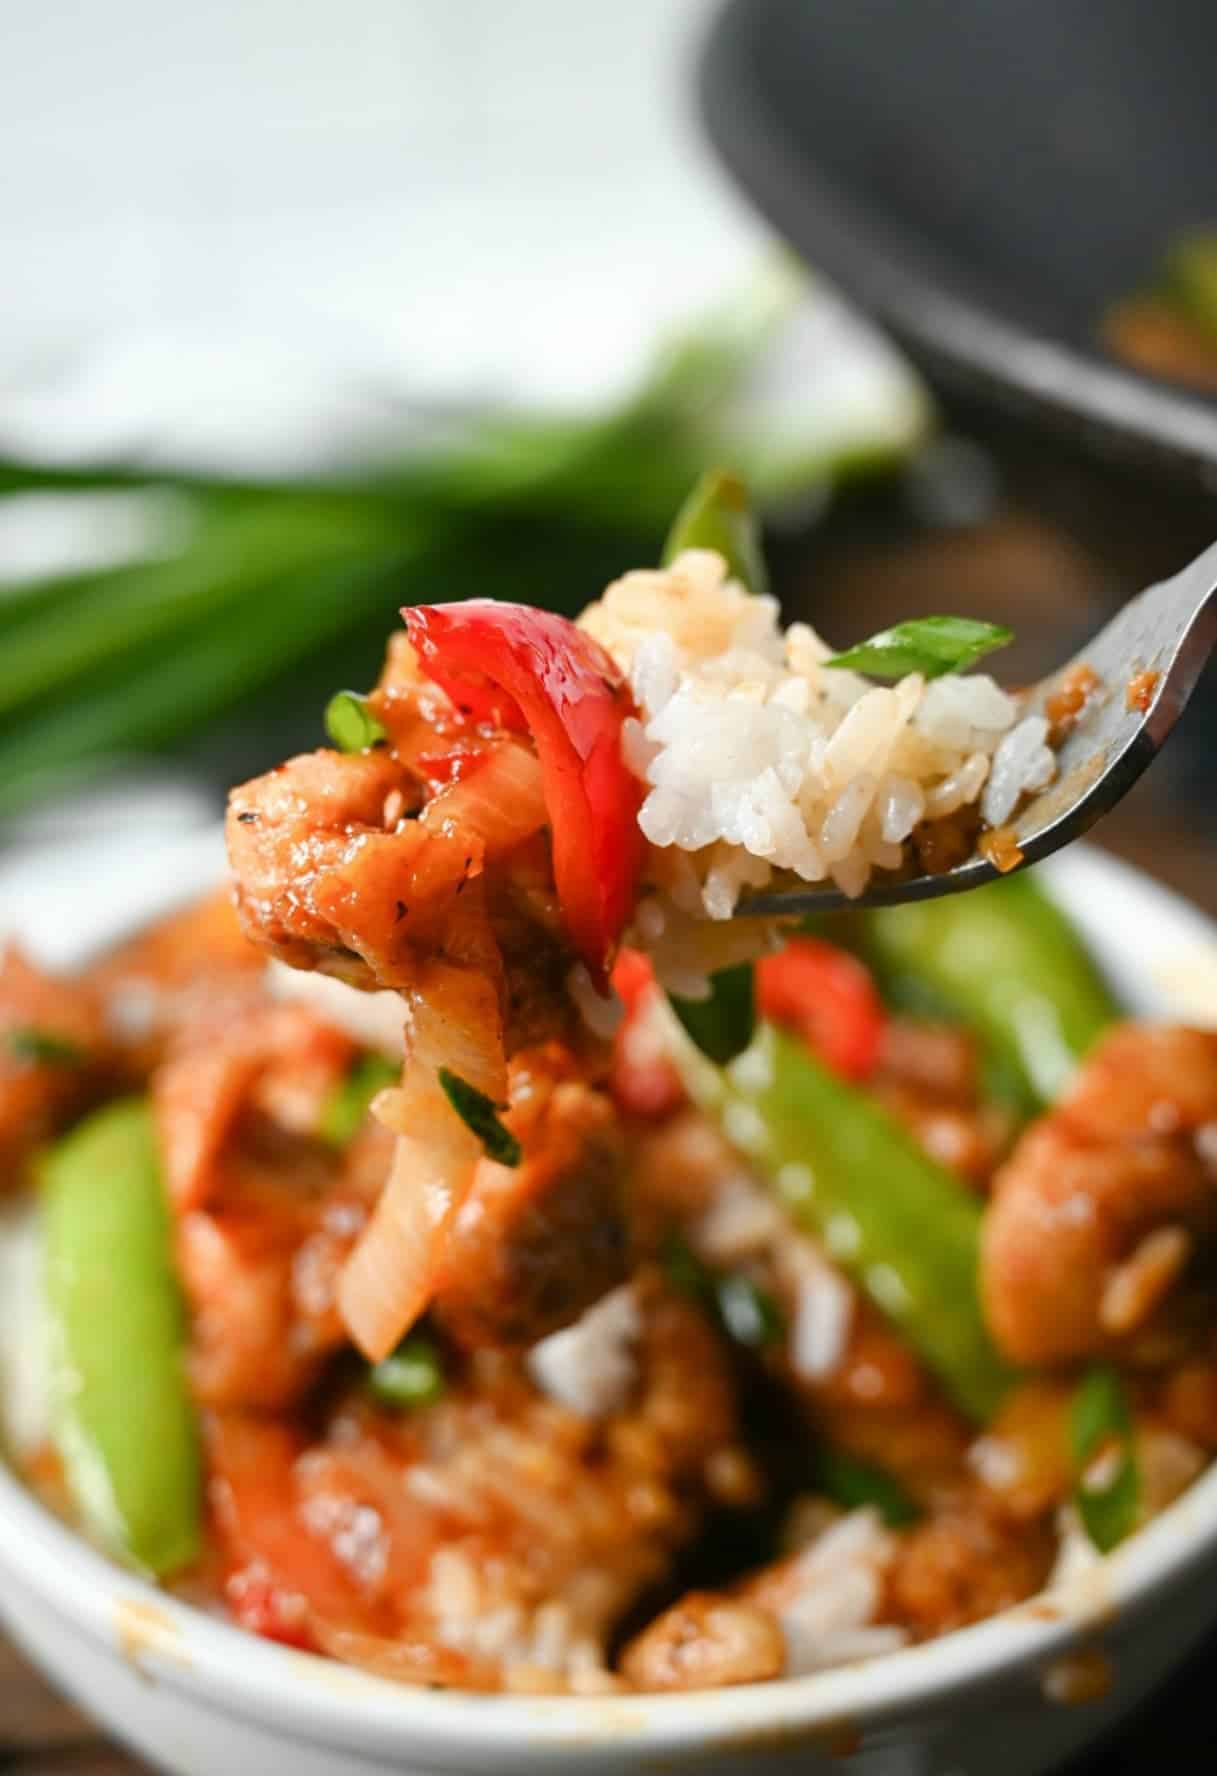 Chicken stir fry in a white bowl on top of white rice and a bite on a fork.